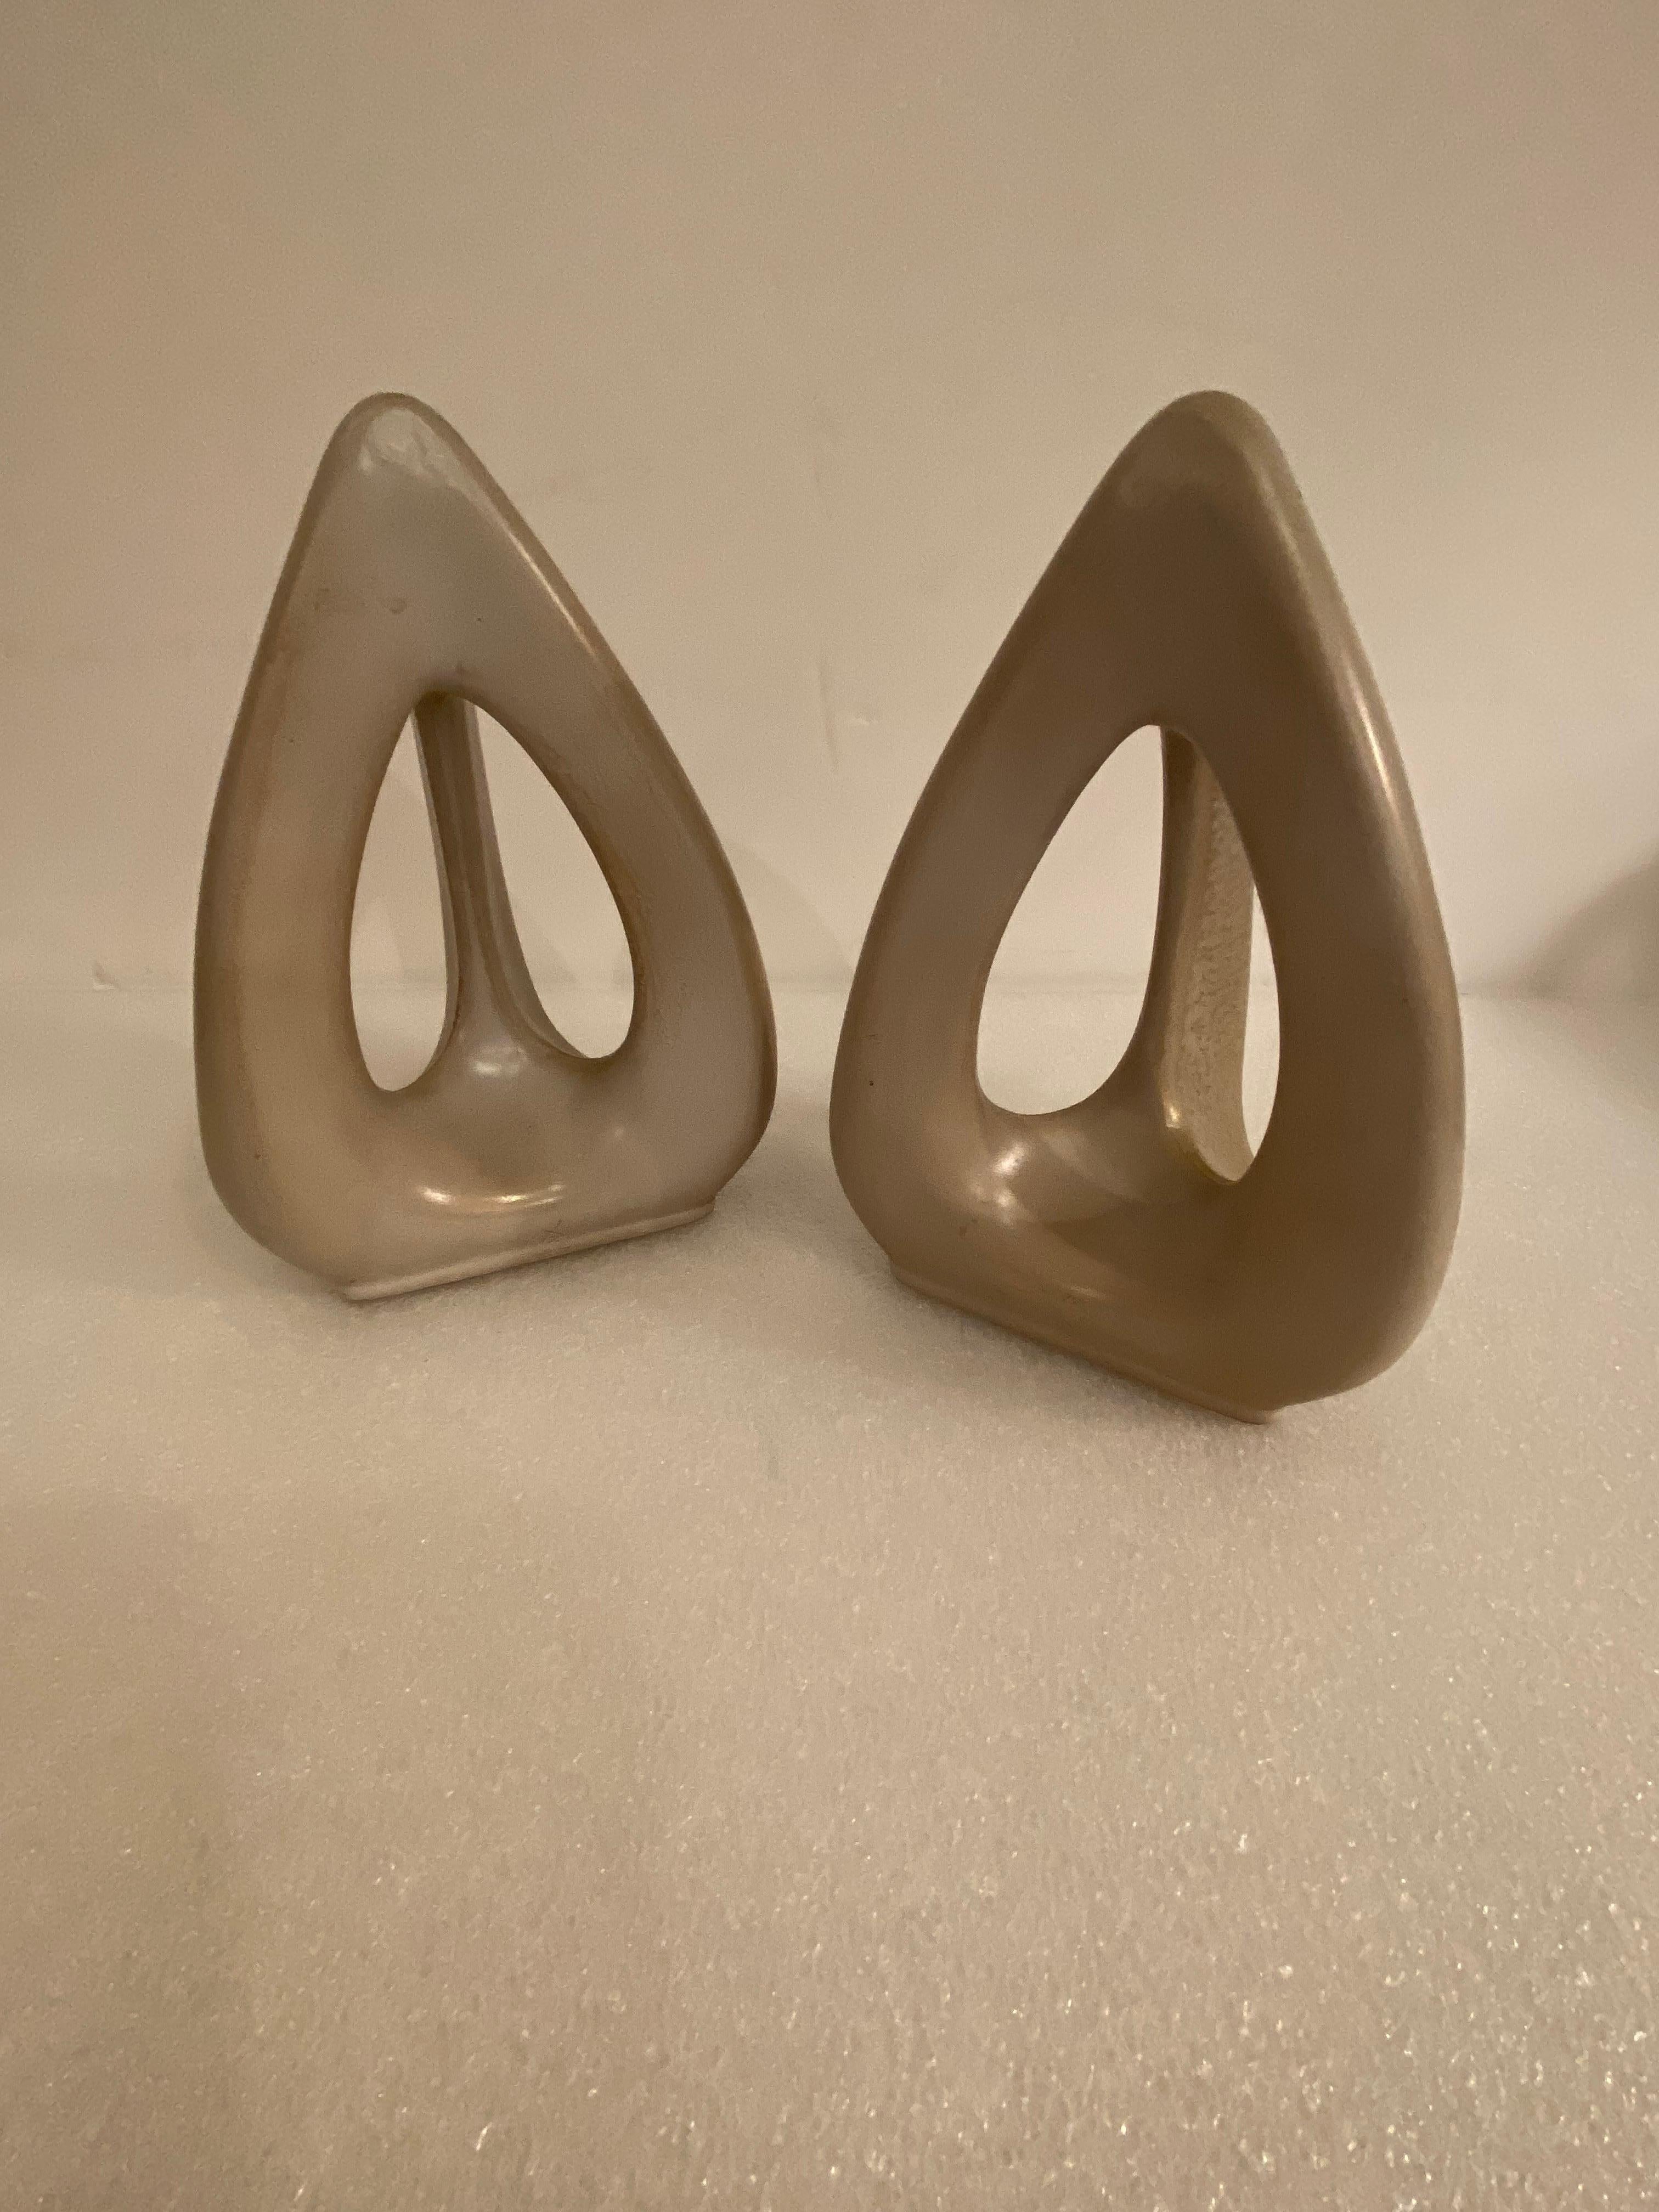 Abstract pair of Ceramic Bookends.  They have the feel of some that Ben Seibel designed and made of metal.  In good shape and heavy enough to hold books in place!